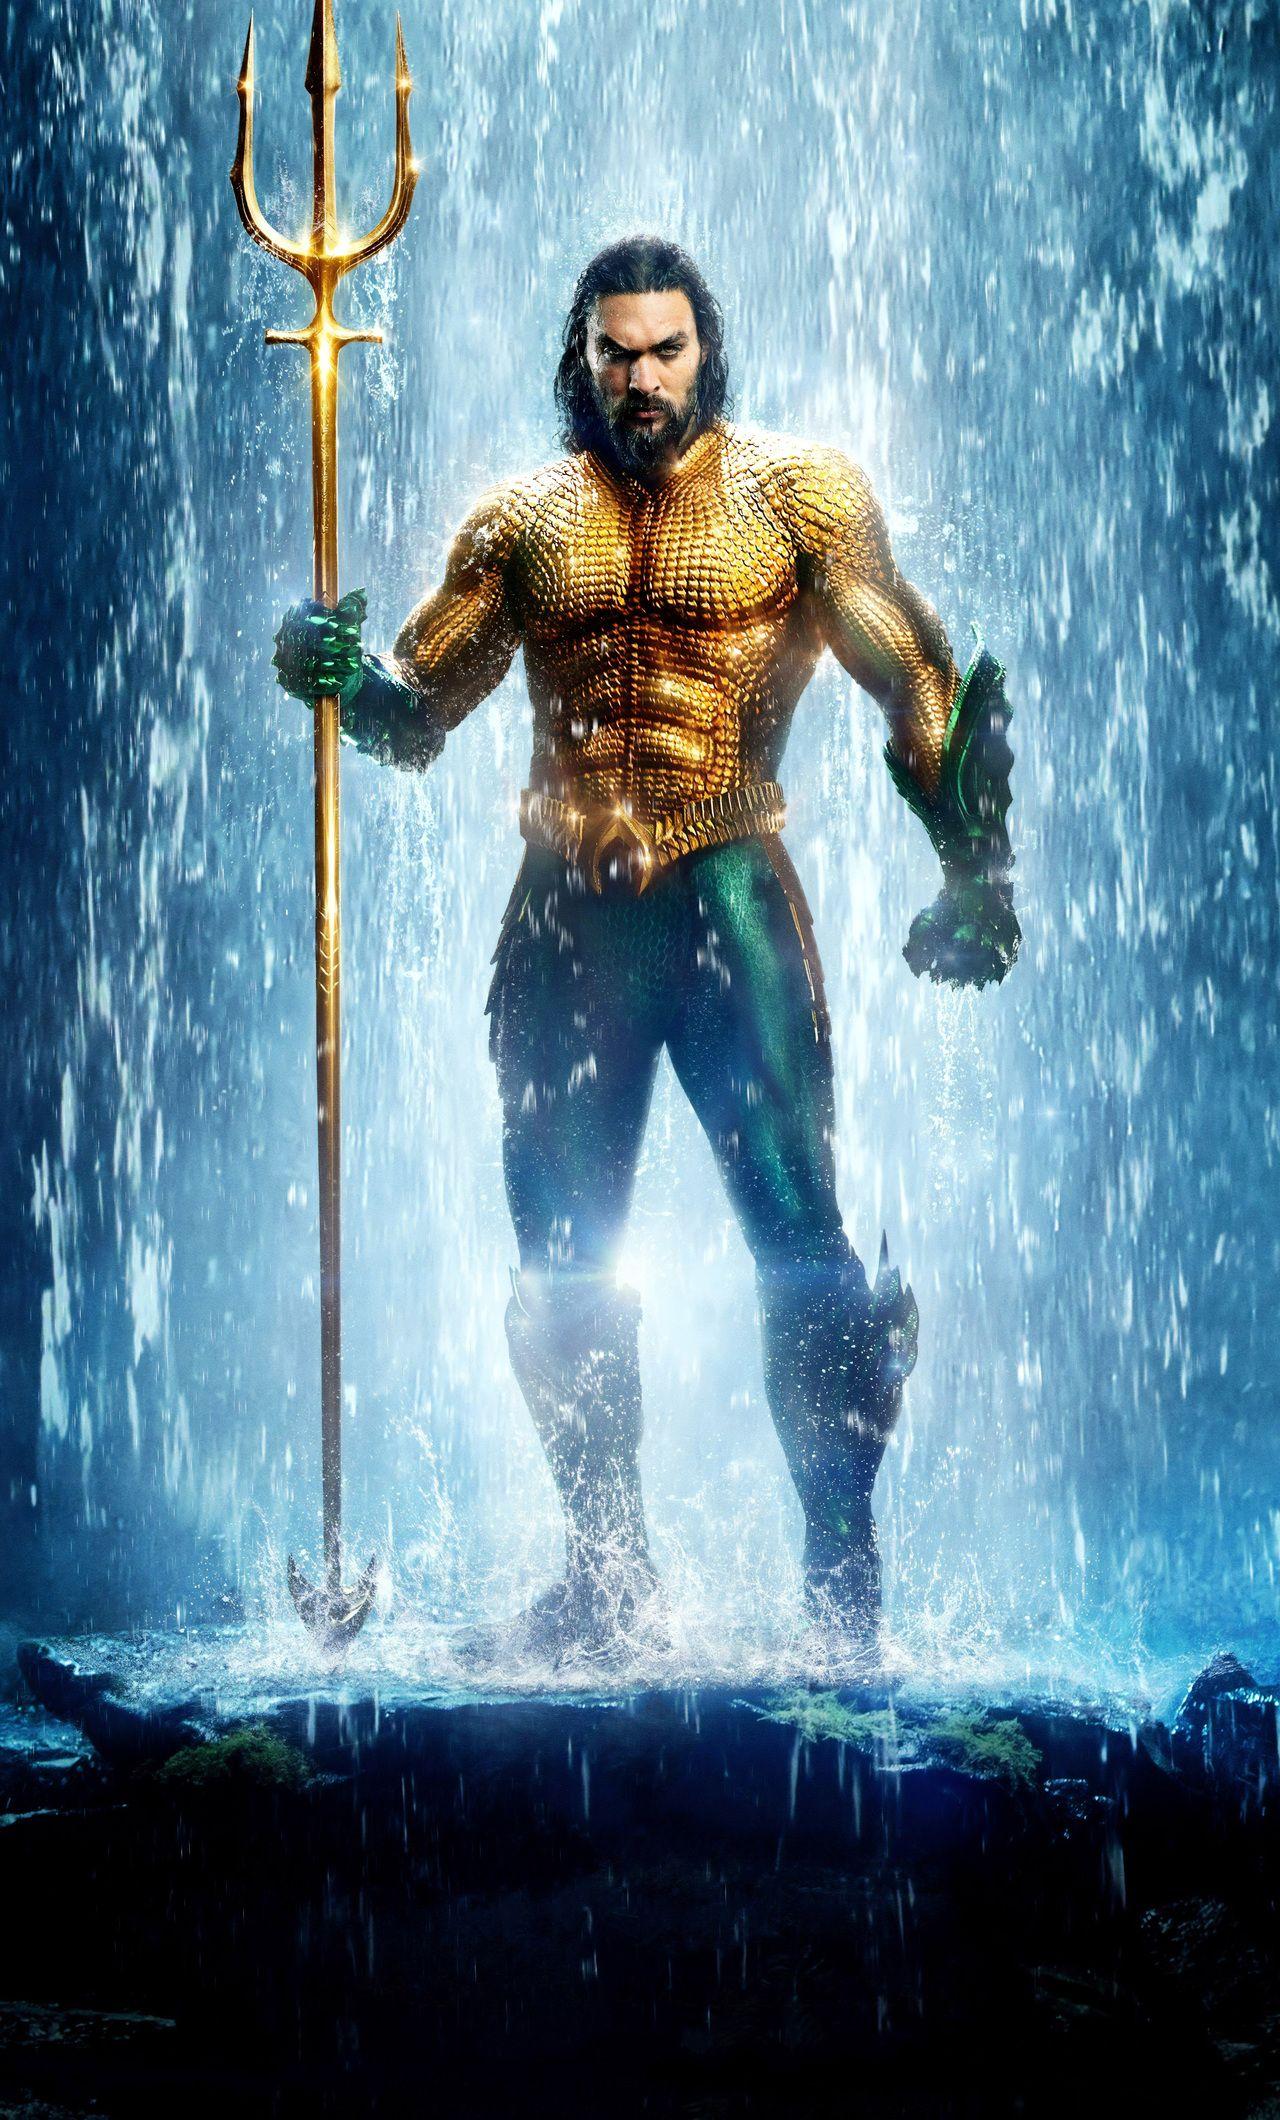 27+ Aquaman Wallpapers: HD, 4K, 5K for PC and Mobile | Download free images  for iPhone, Android